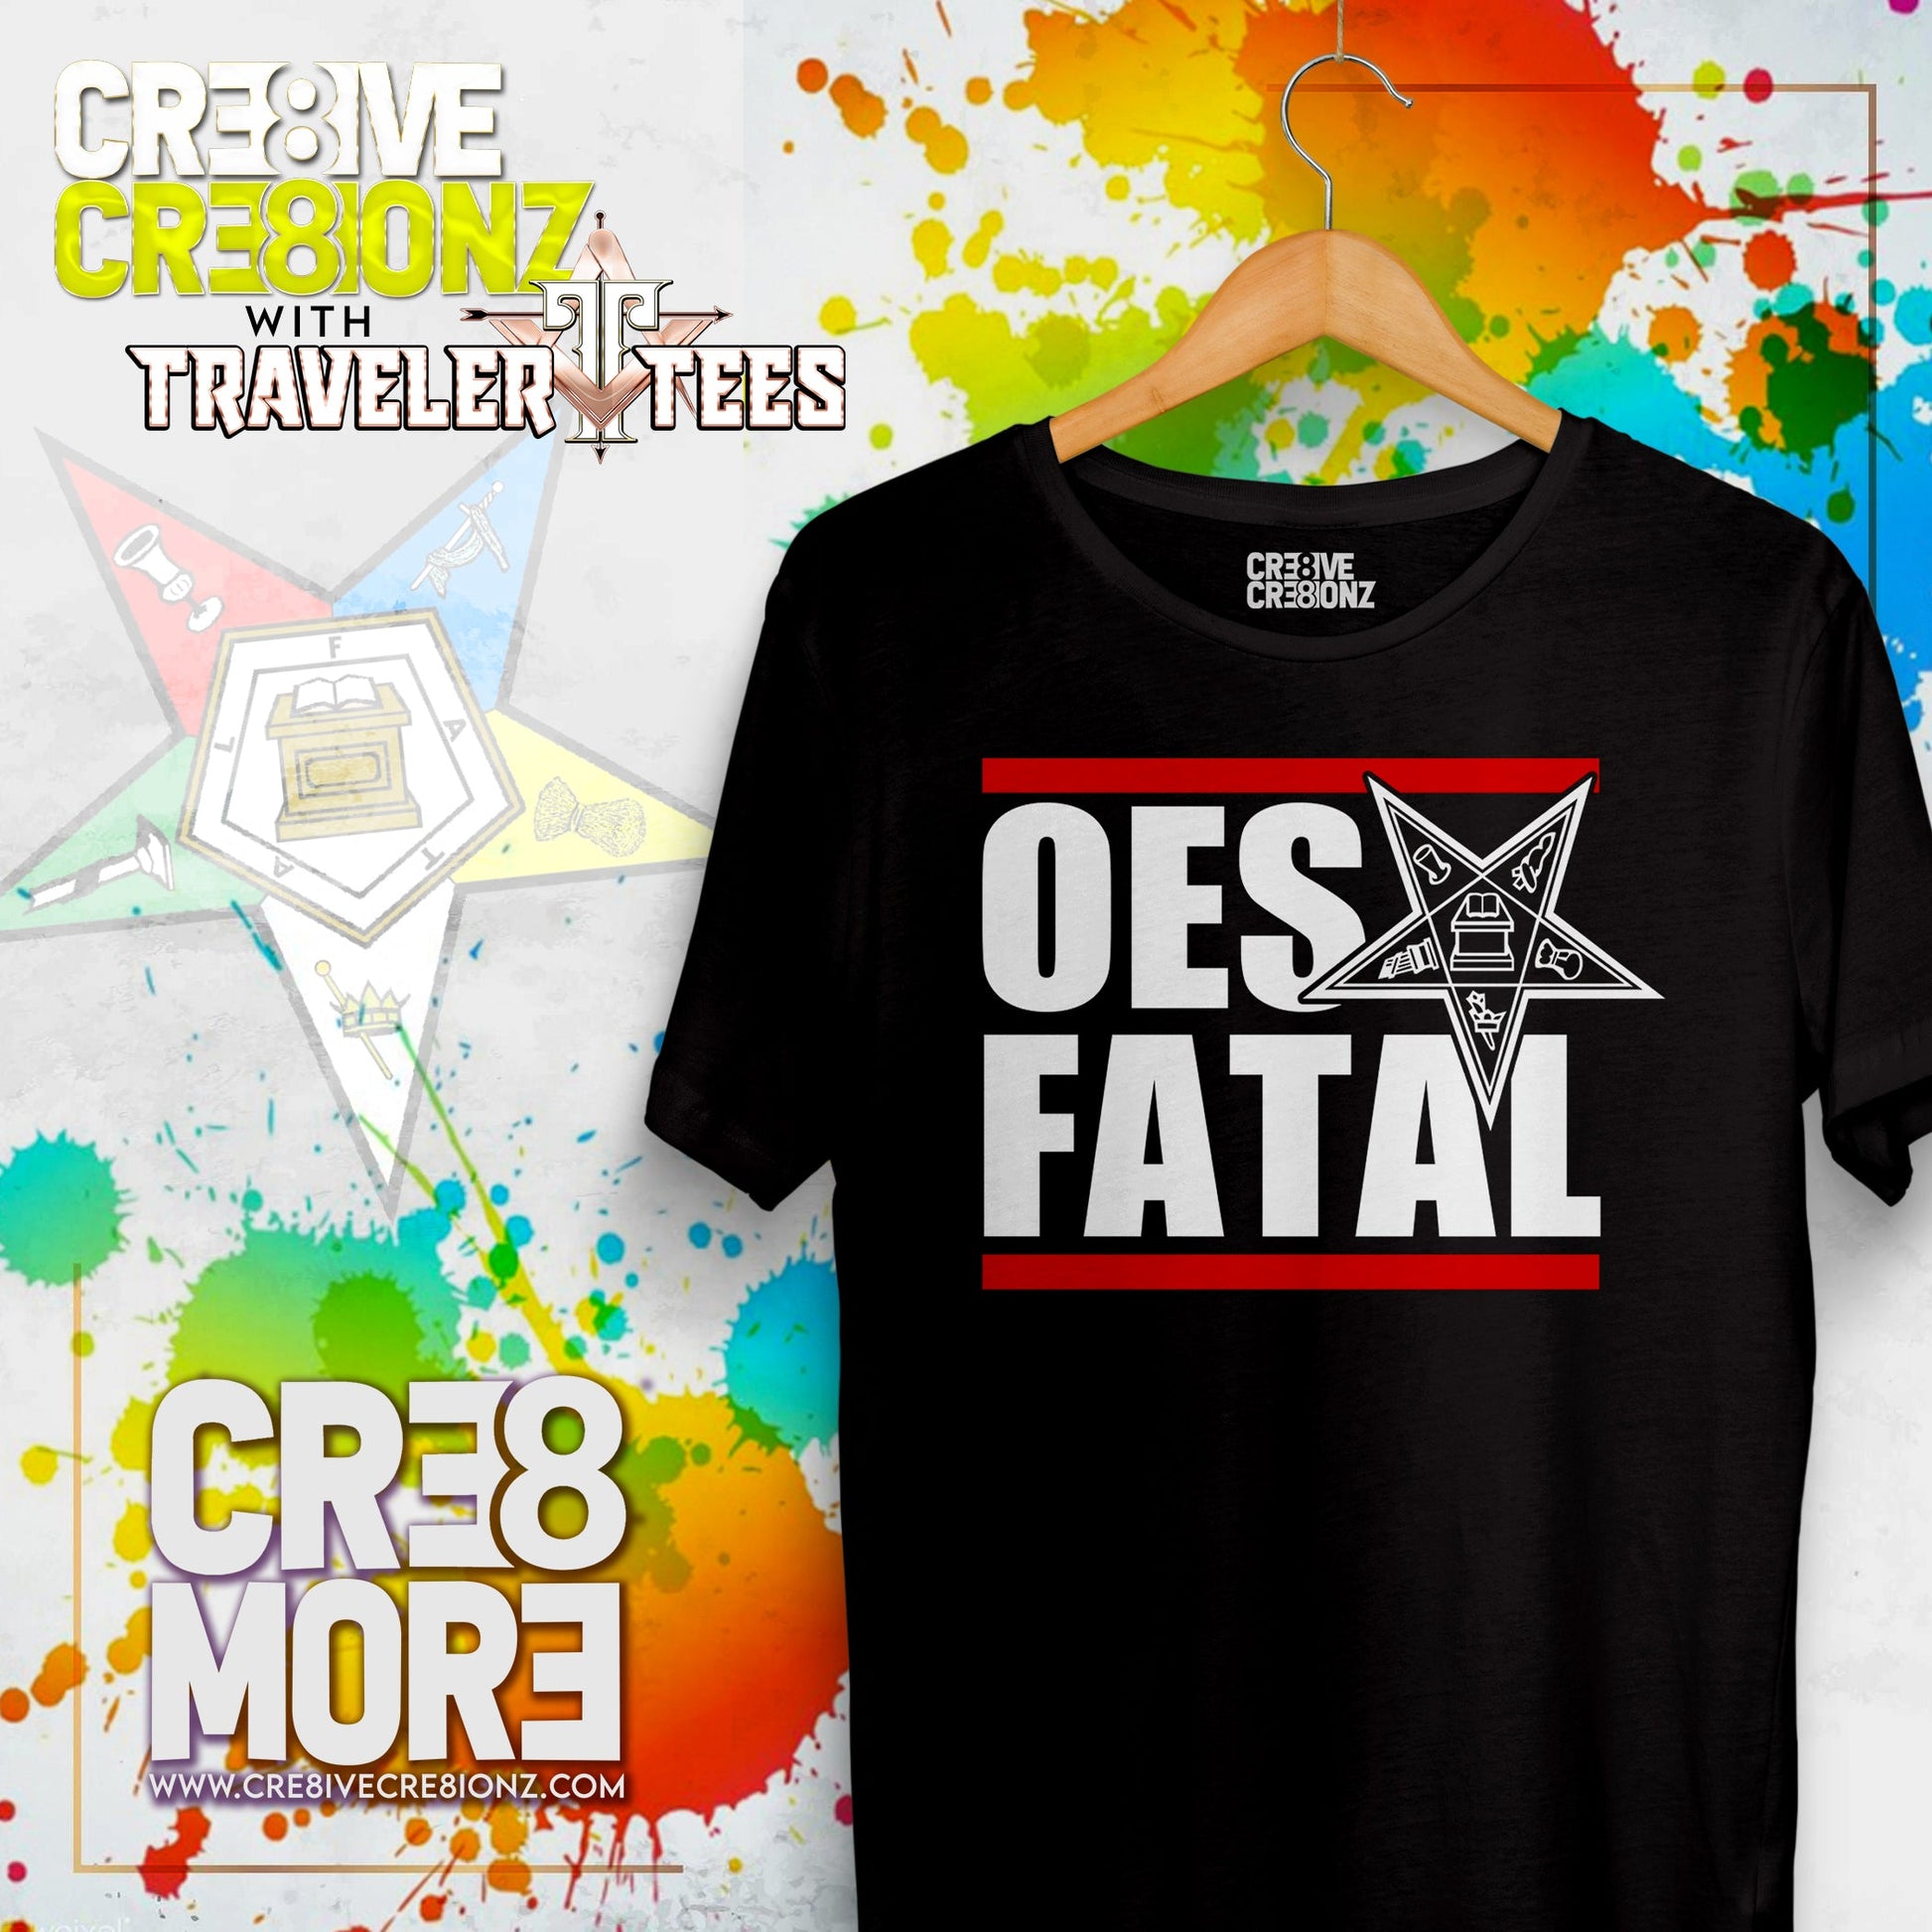 OES FATAL Shirt - Cre8ive Cre8ionz